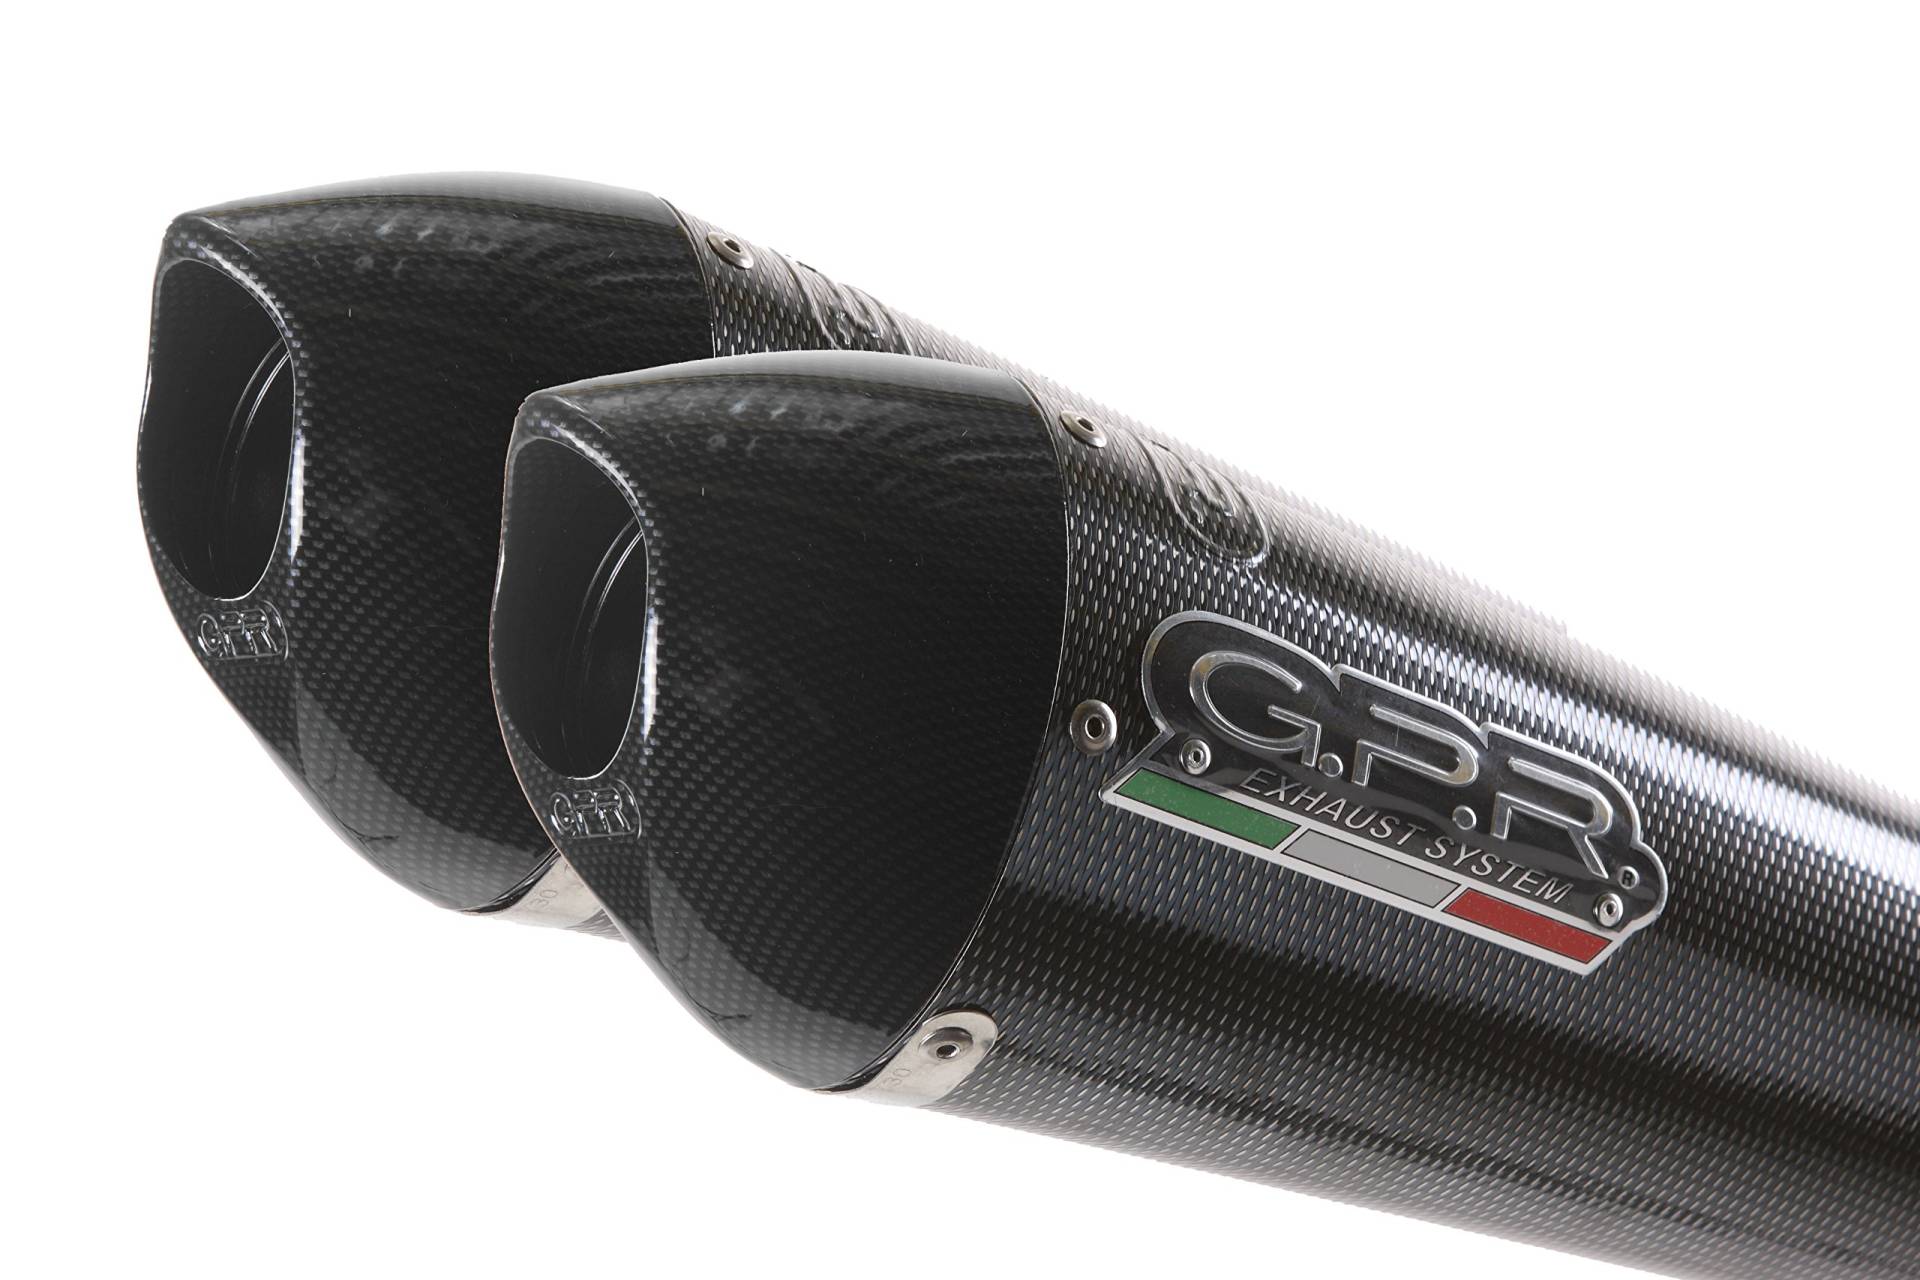 GPR Auspuff Endkappe – Ducati Supersport S 750 2001/02 Dual HOMOLOGATED Slip Exhaust System by GPR Exhaust Systems der EVO Poppy Line von GPR EXHAUST SYSTEM